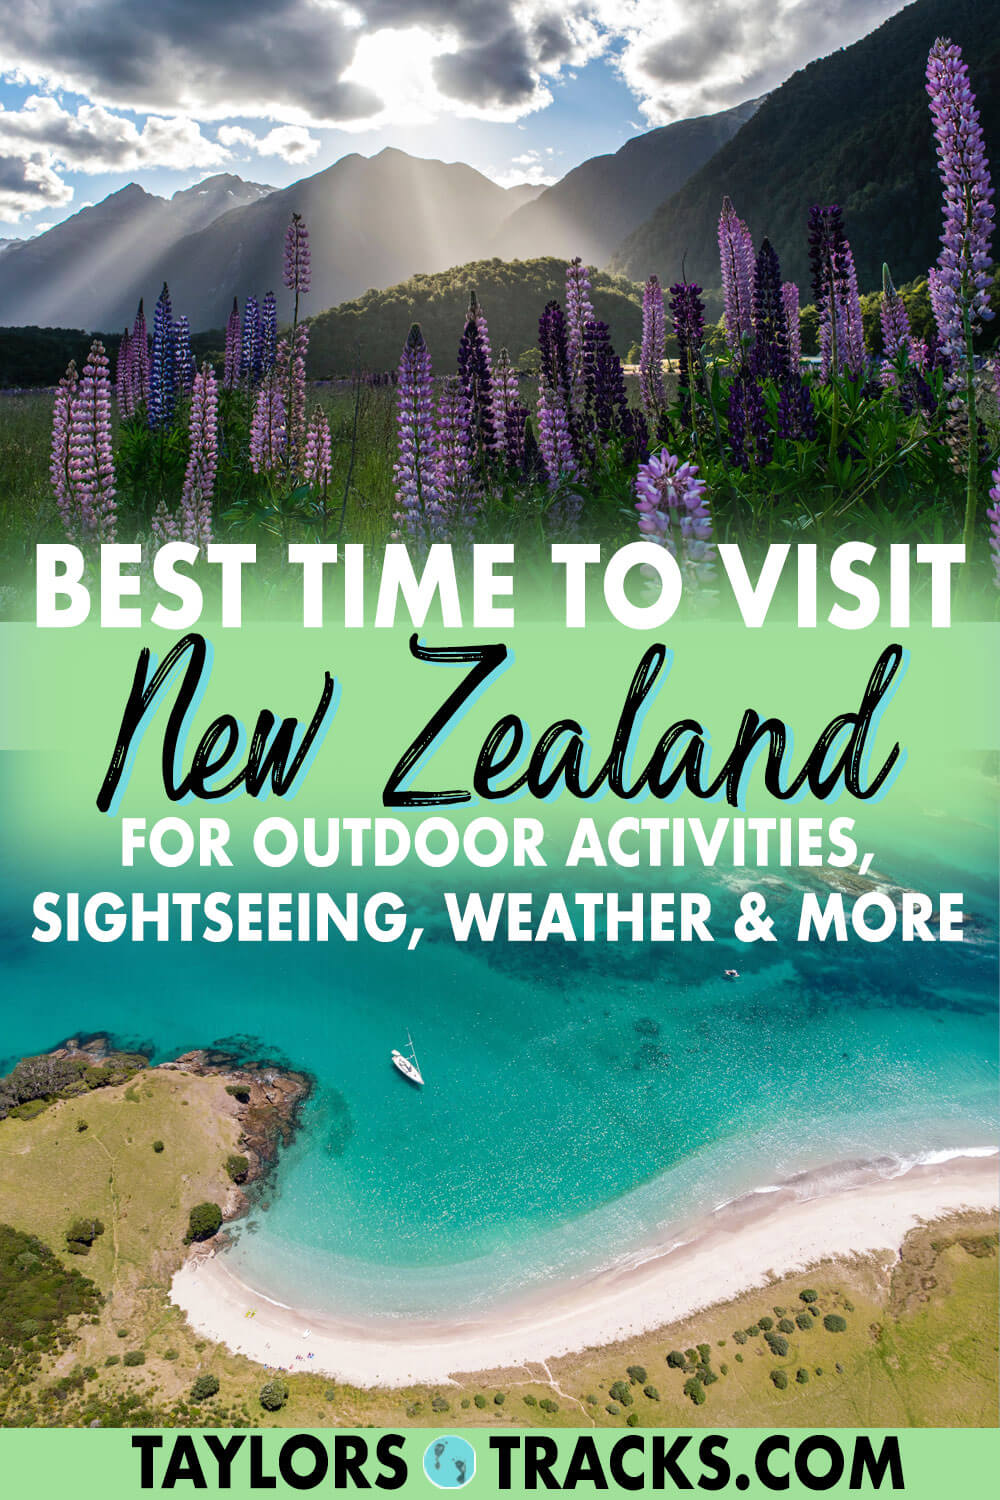 nz travelling times